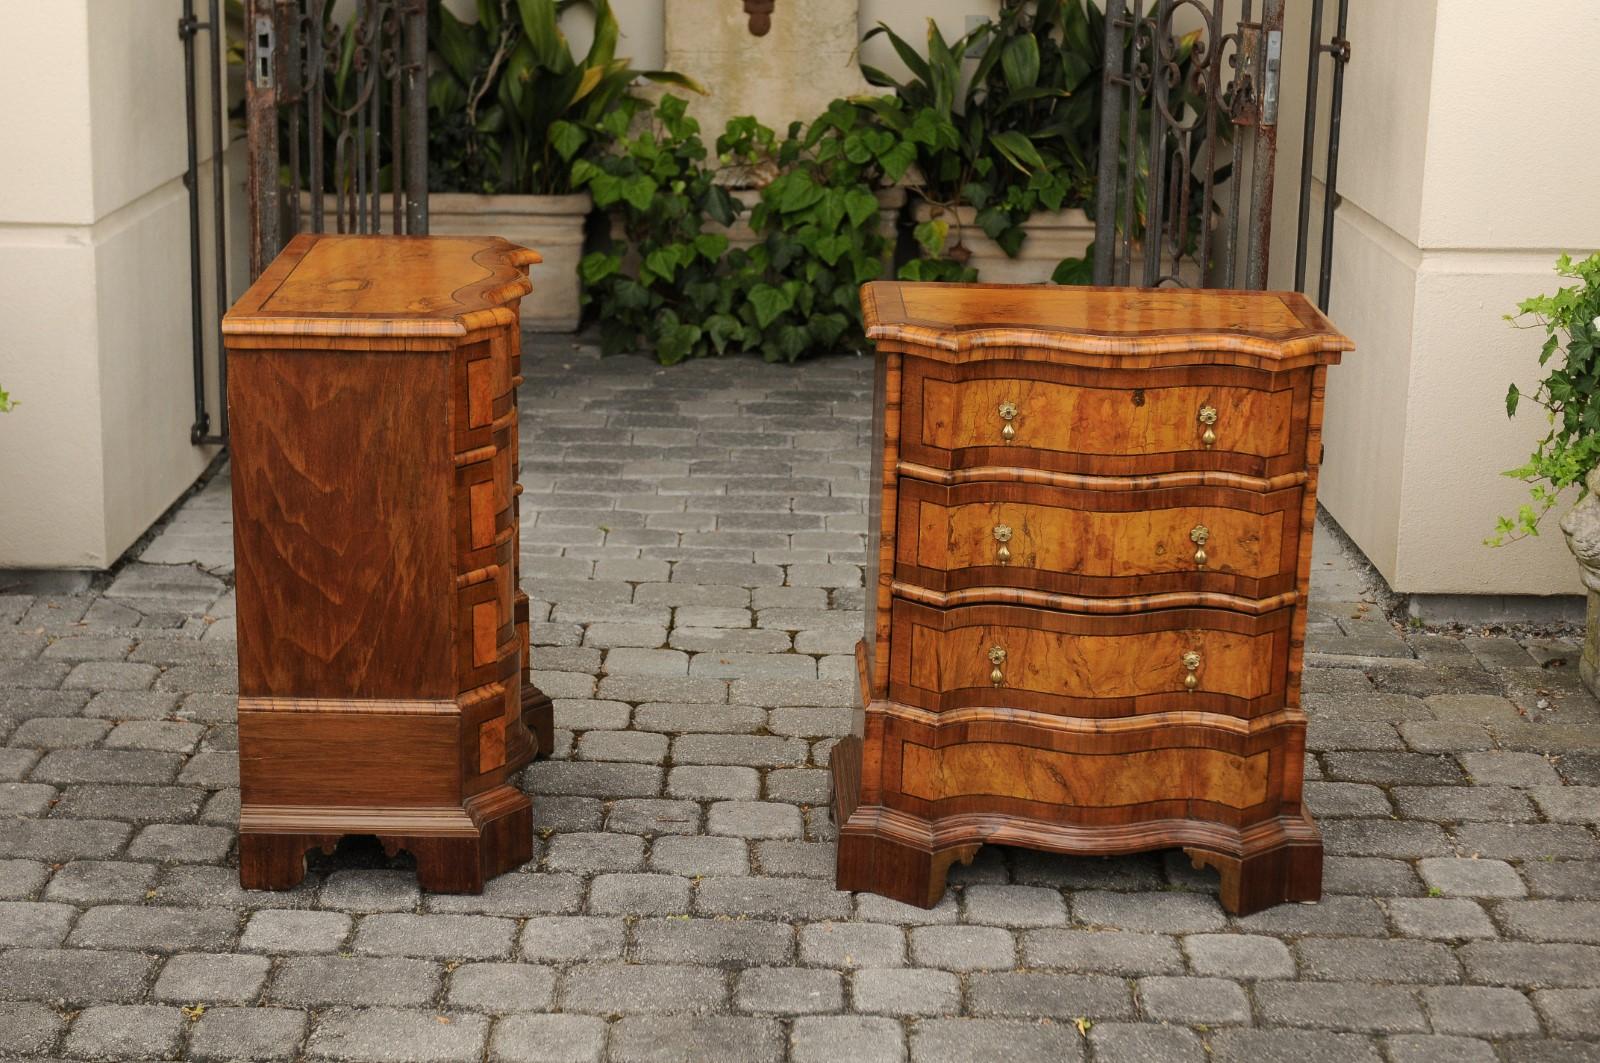 A pair of Italian small burl walnut commodes from the late 19th century, with serpentine front and banding. Born in Italy during the last decade of the 19th century, each of this pair of small commodes features an exquisite top, adorned with burl